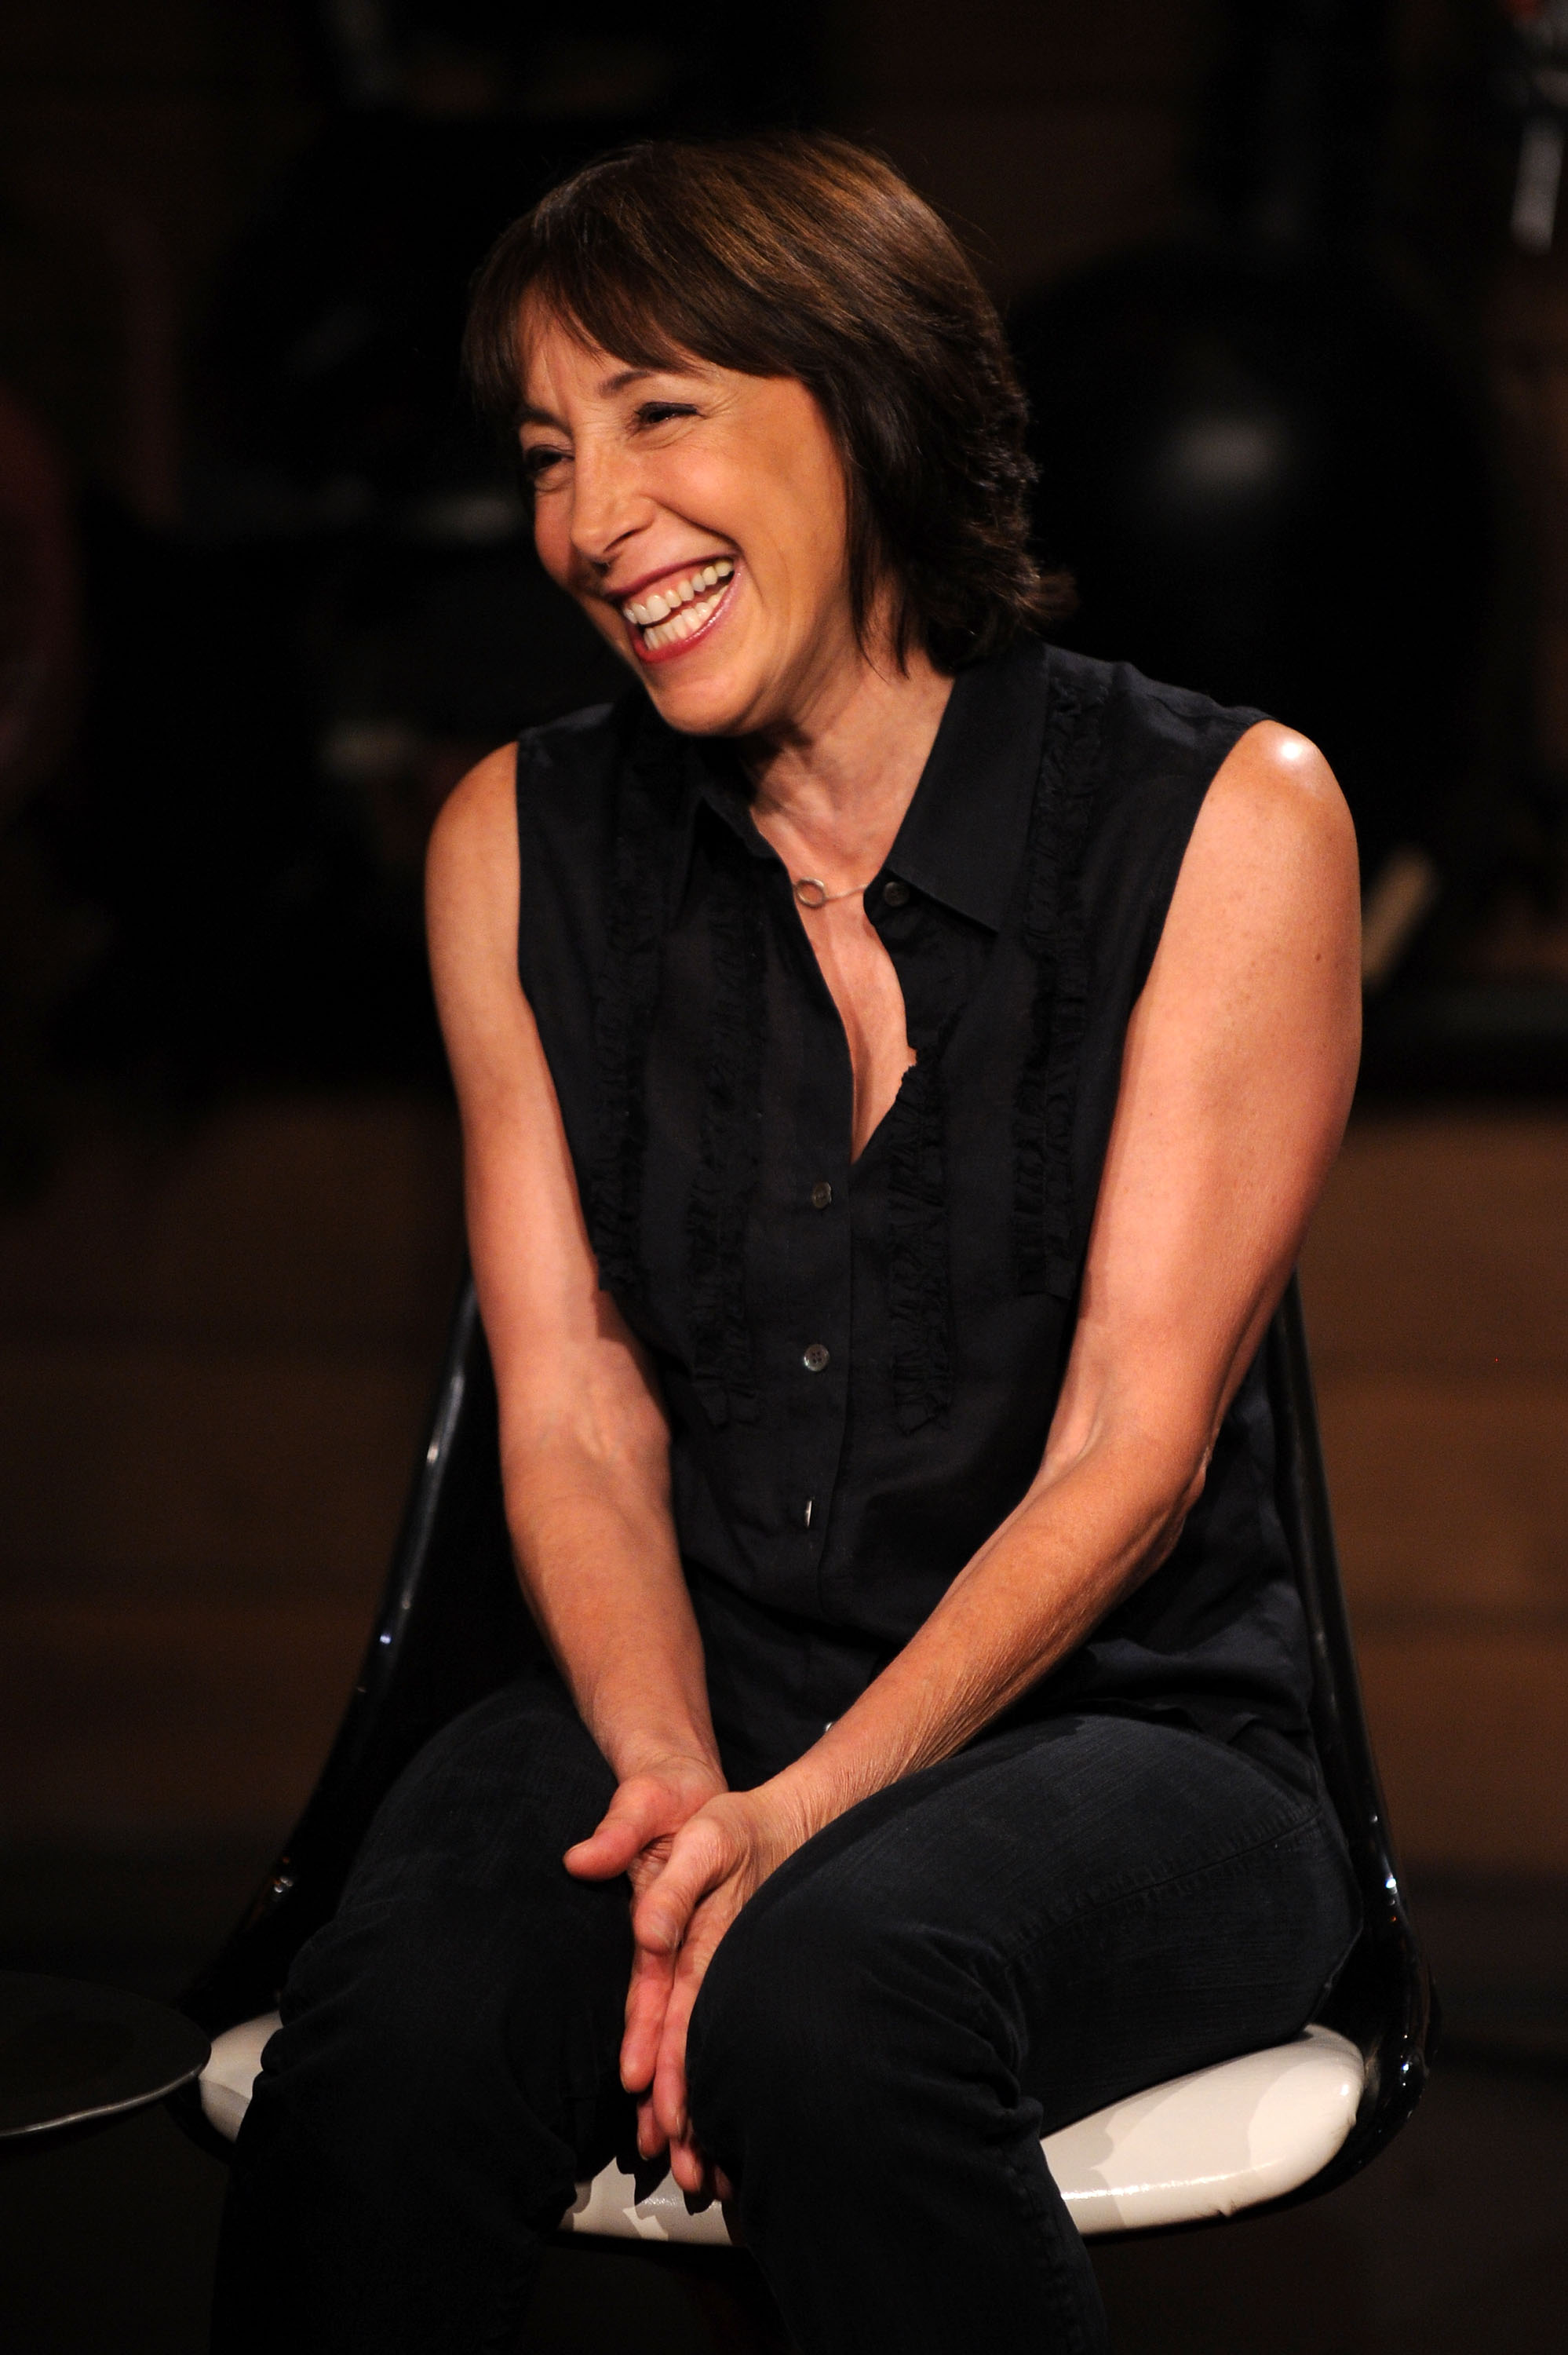 Actress Didi Conn visits "Fuse Top 20 Countdown" at fuse Studios on July 8, 2010 in New York City | Source: Getty Images